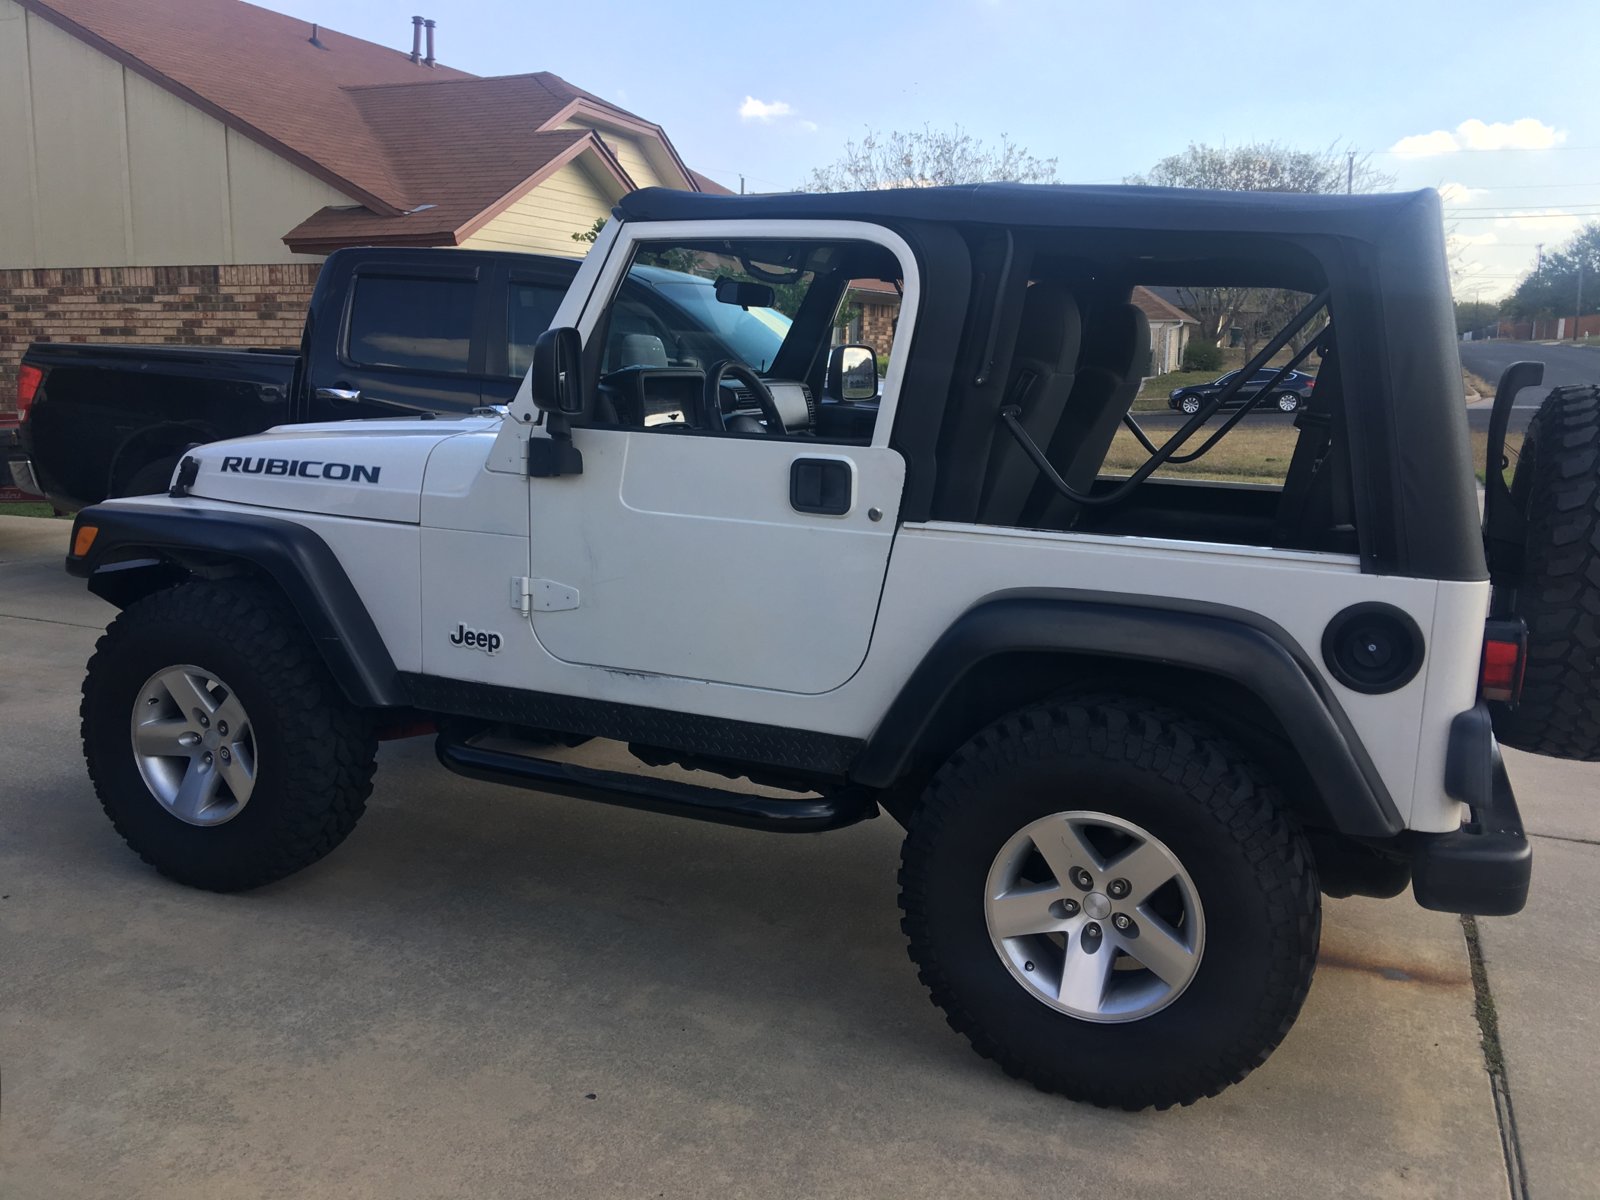 New to Jeep! Started with a 2003 TJ! | Jeep Wrangler TJ Forum